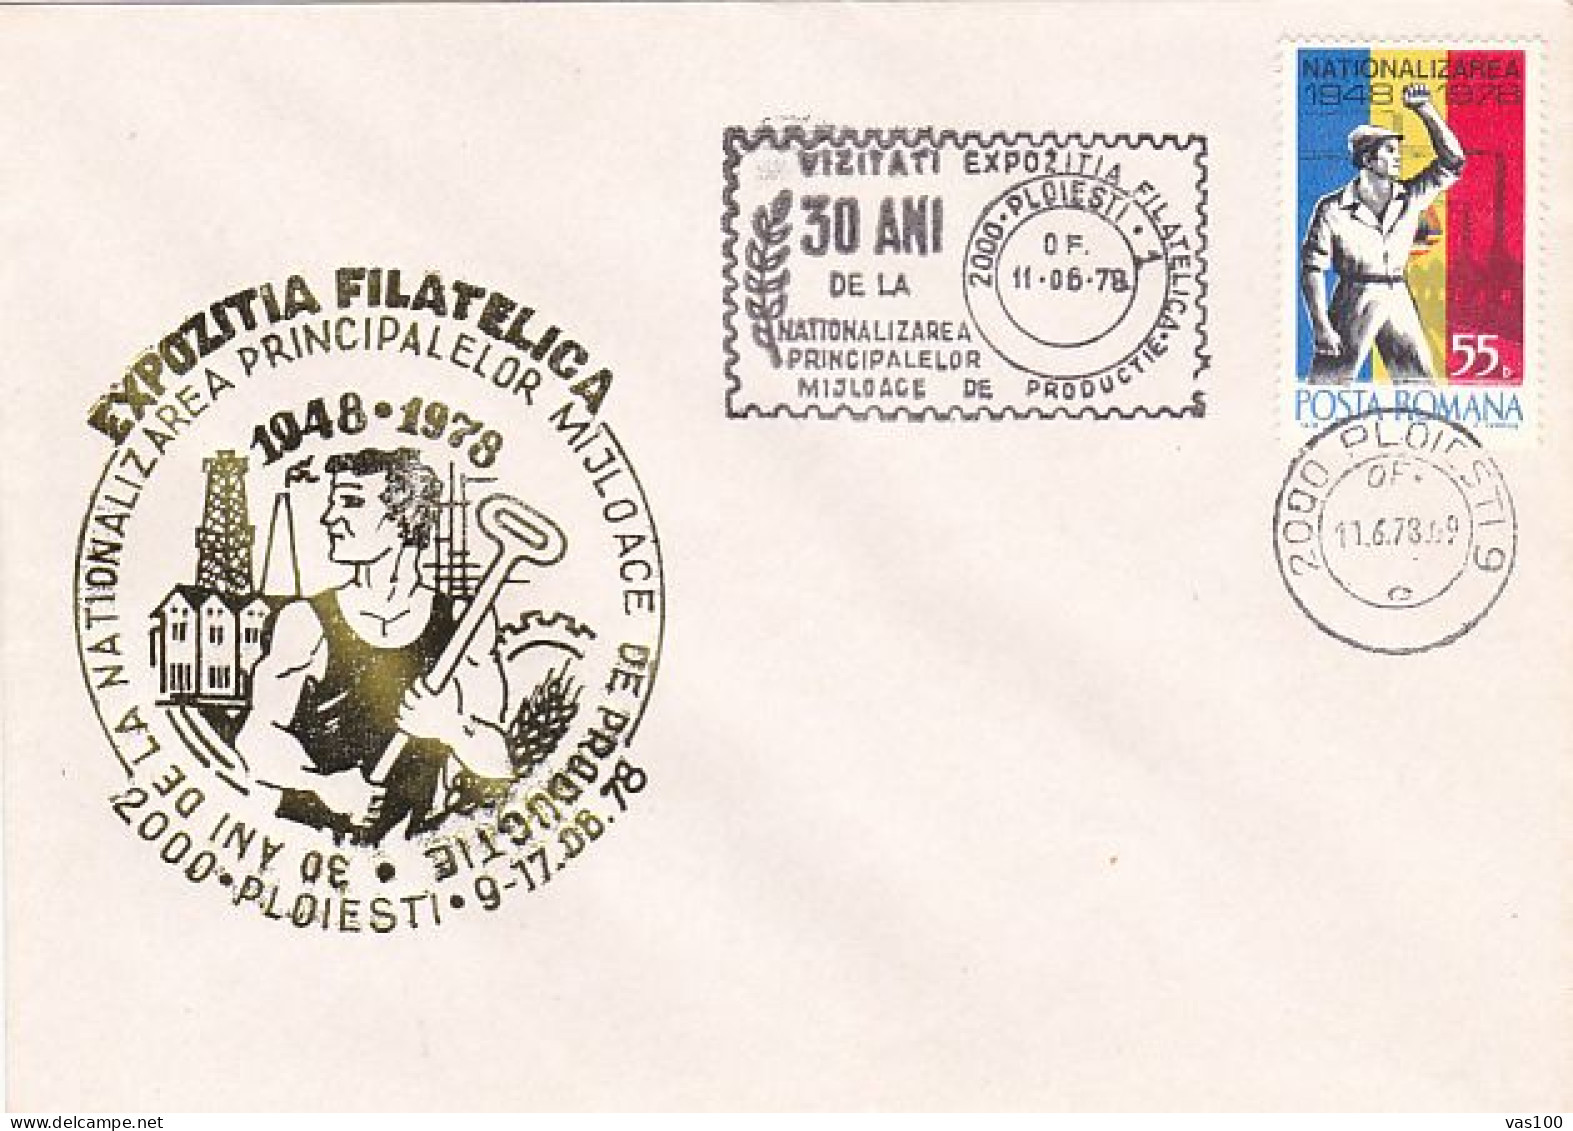 MAIN PRODUCTION MEANS NATIONALIZATION, WELDER, SPECIAL COVER, 1978, ROMANIA - Briefe U. Dokumente